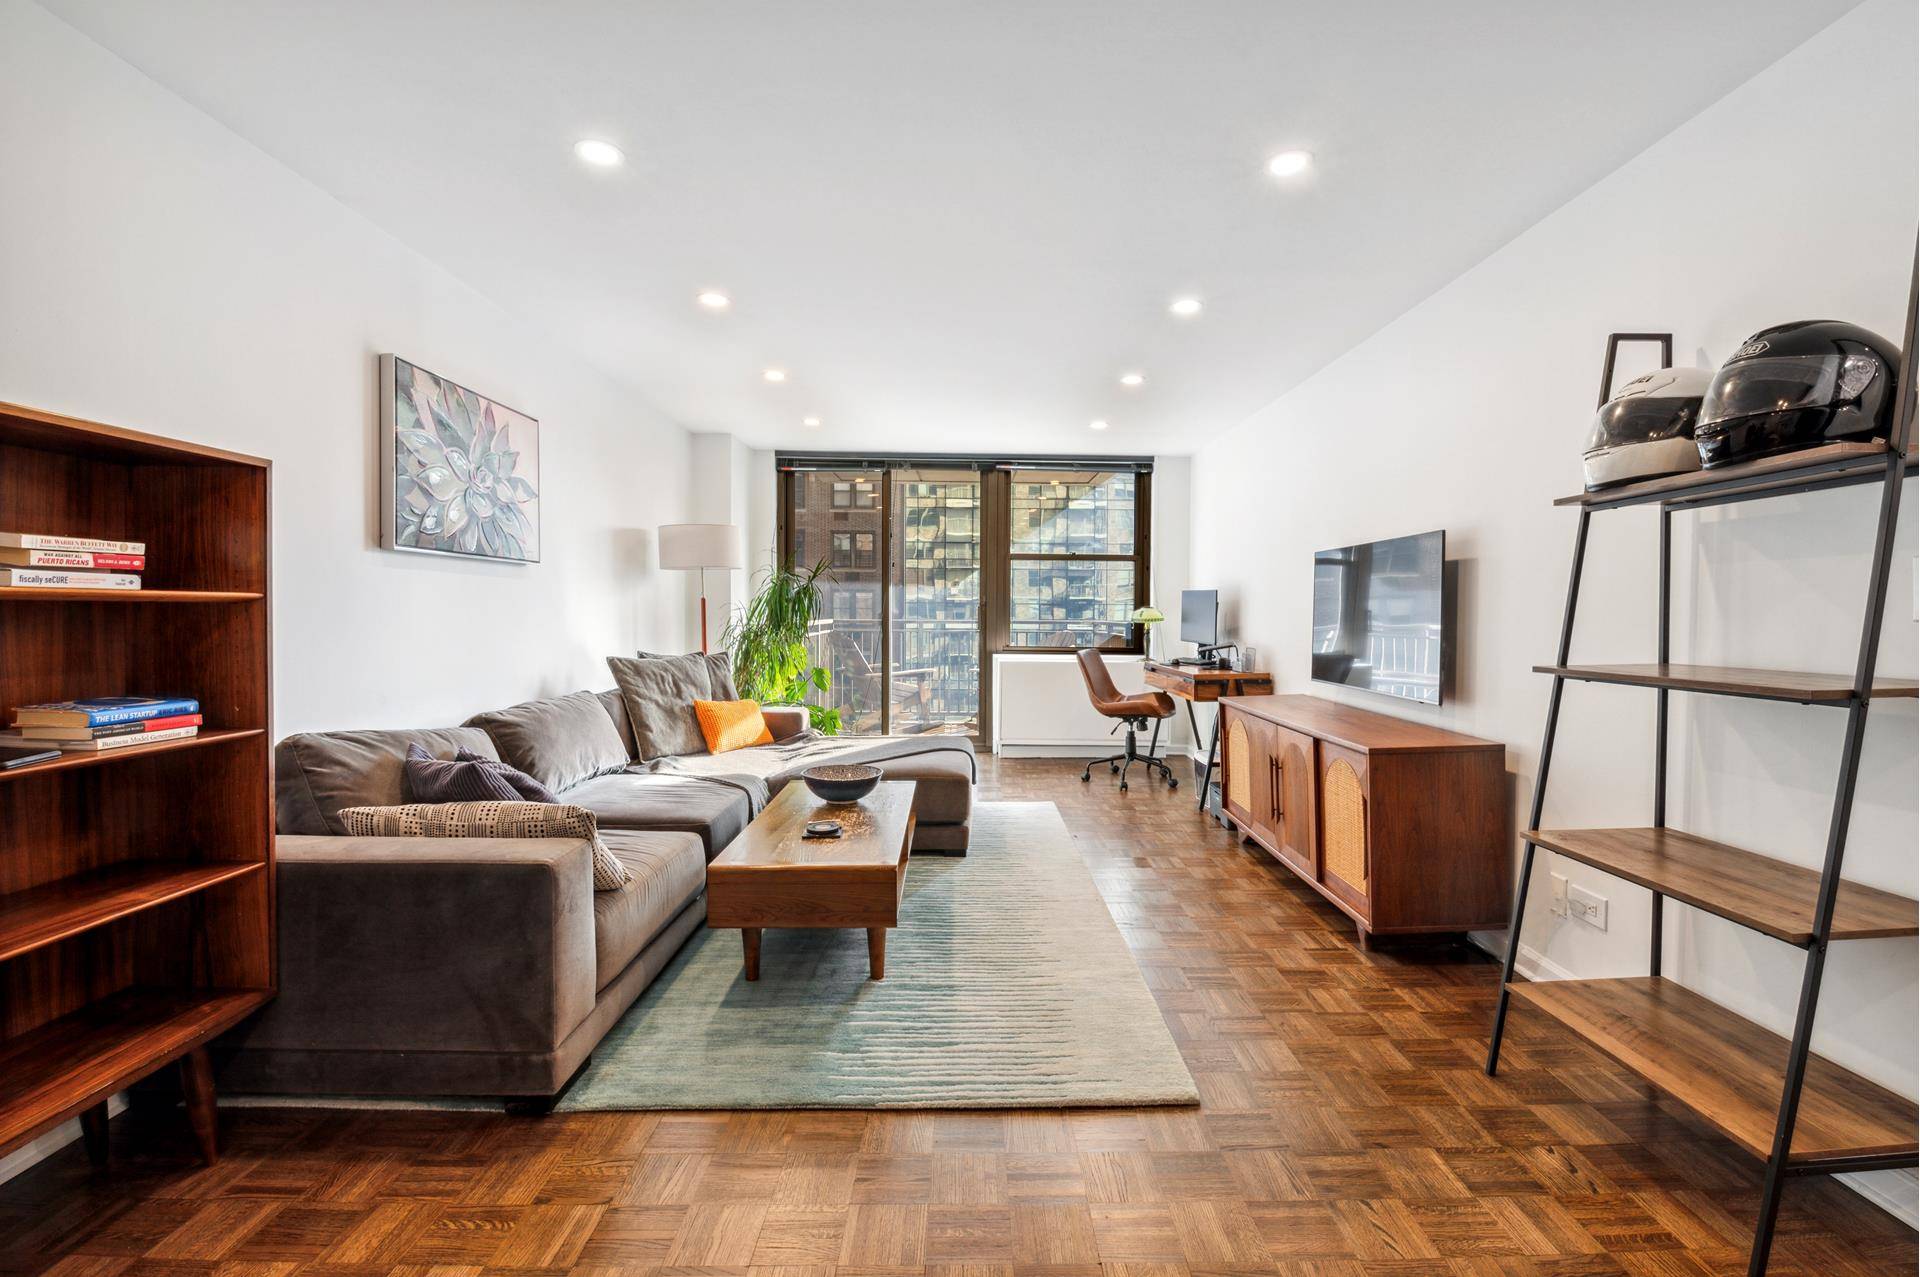 Located in the heart of the Upper East Side, this newly renovated and light filled 1 bedroom, 1 bathroom home is the pinnacle of luxury living.